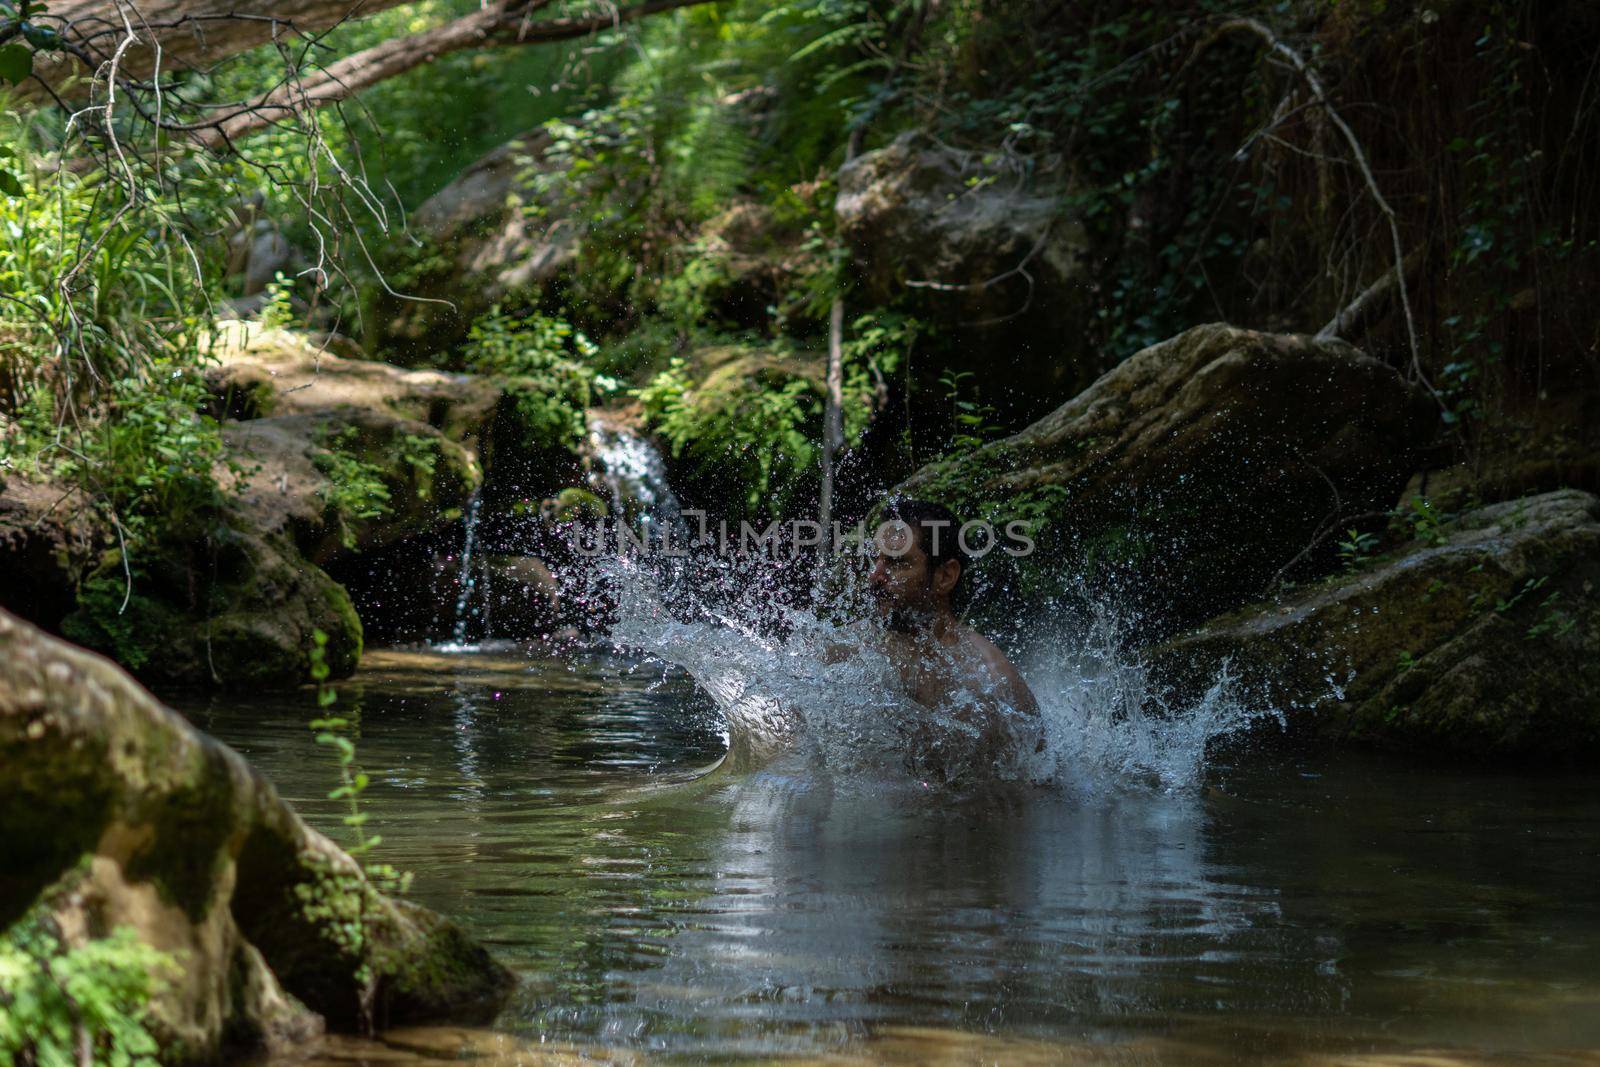 young man jumping from a rock into the river by joseantona